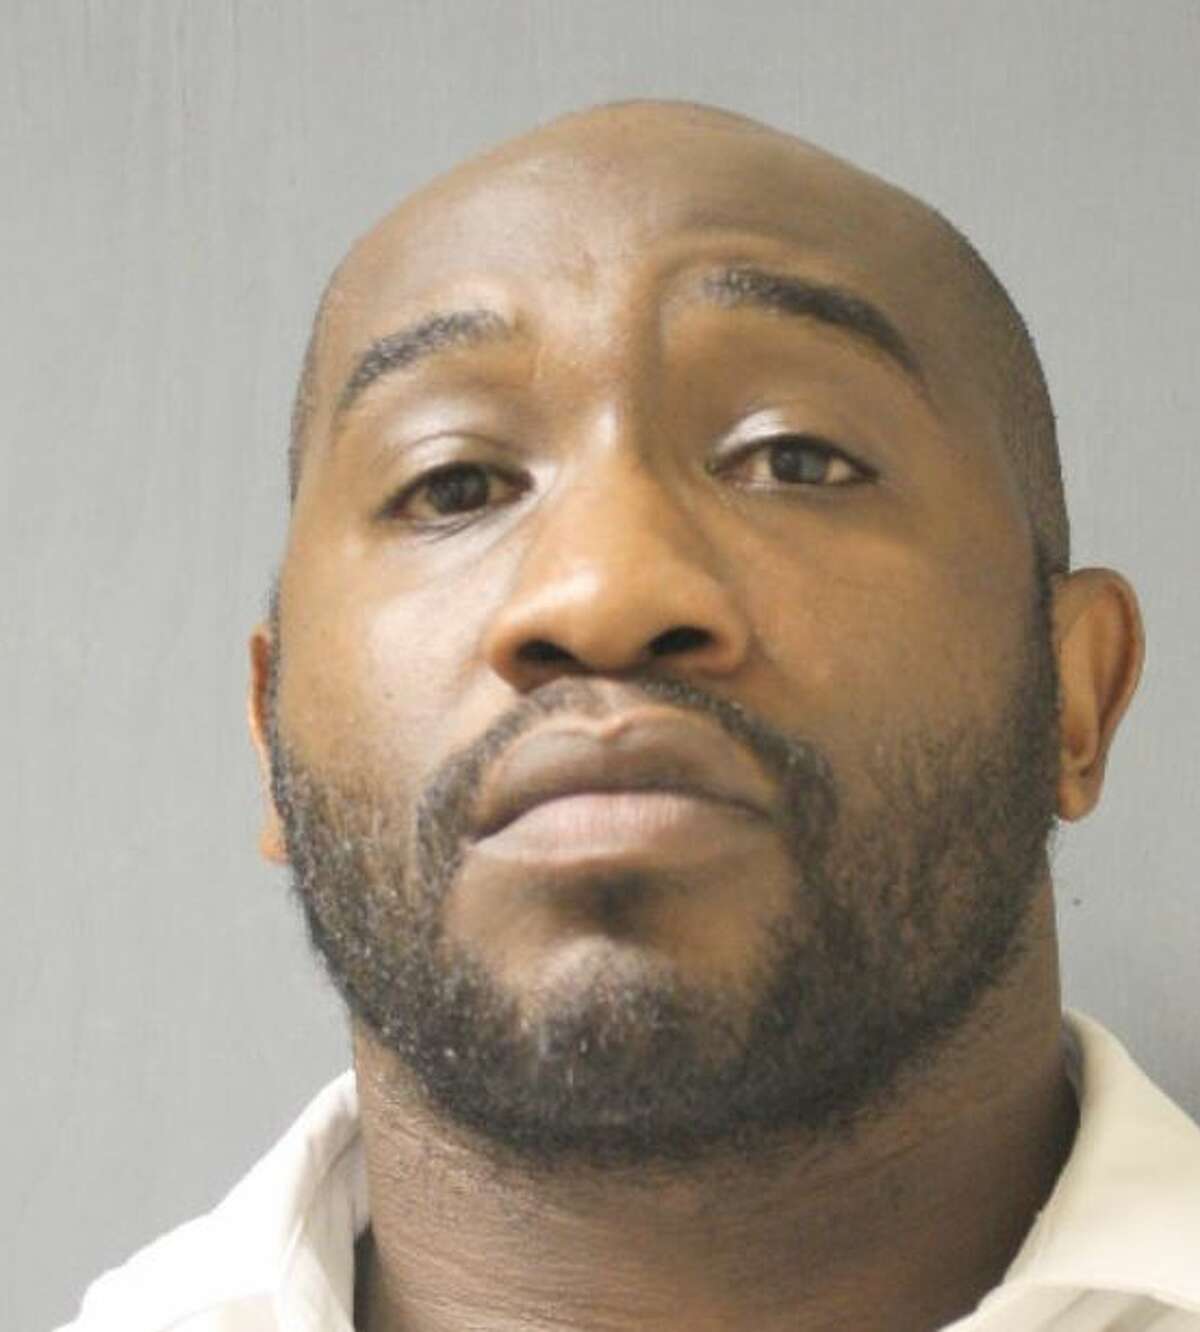 Jameel Antwon Cook, a former Houston Texans player, was convicted this week of stealing more than $100,000 from a health-reimbursement fund for former NFL players.